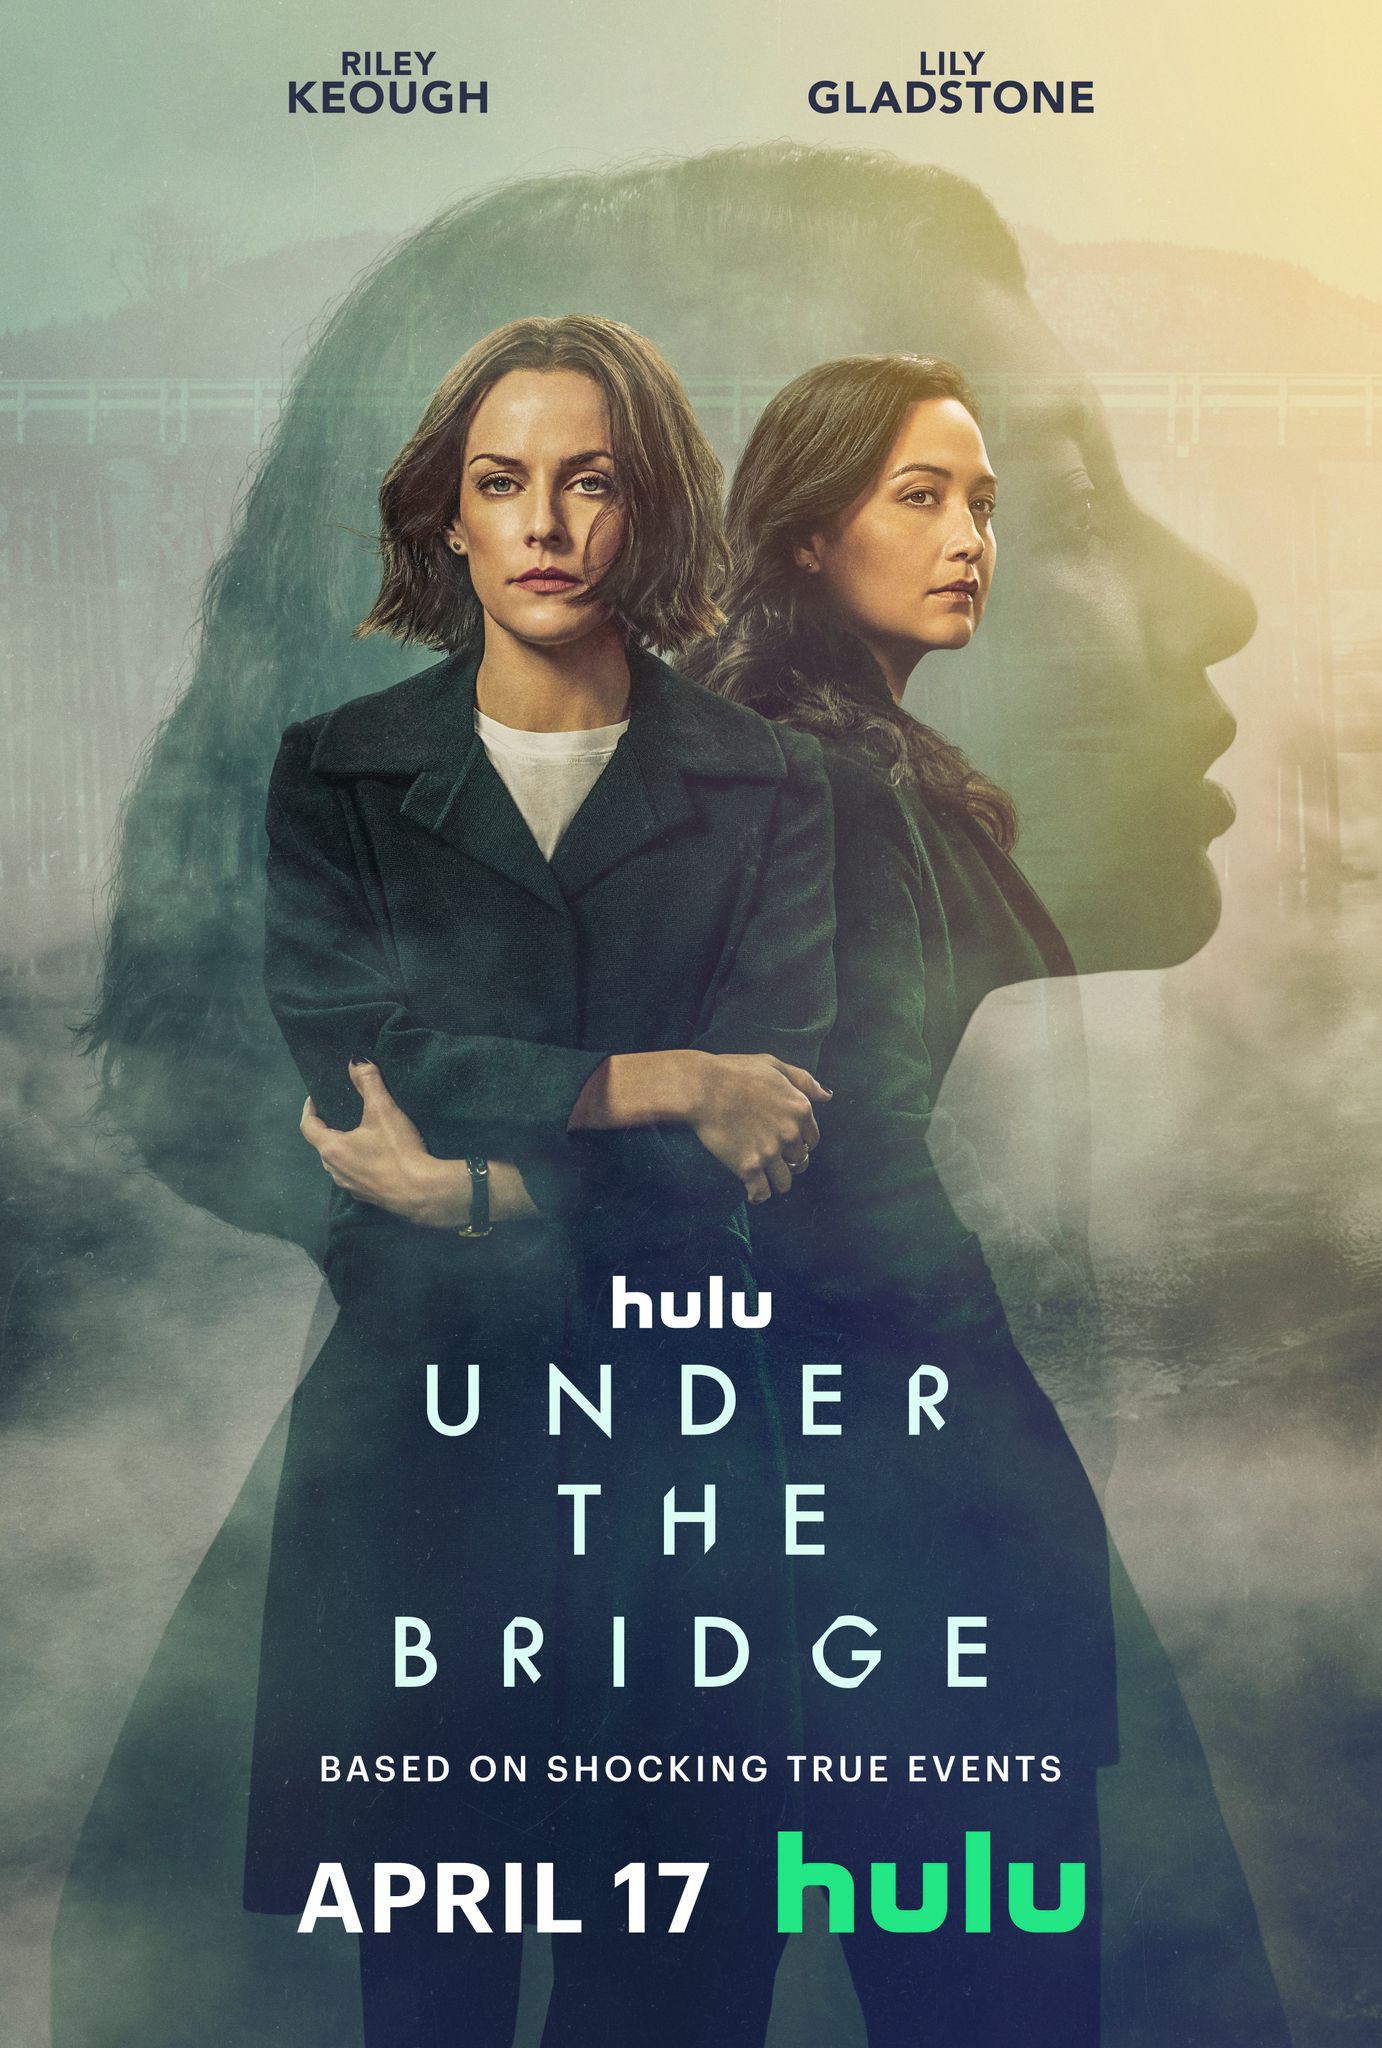 Under the Bridge TV Show Poster Featuring Riley Keough and Lily Gladstone Standing in front of a Woman's Silhouette